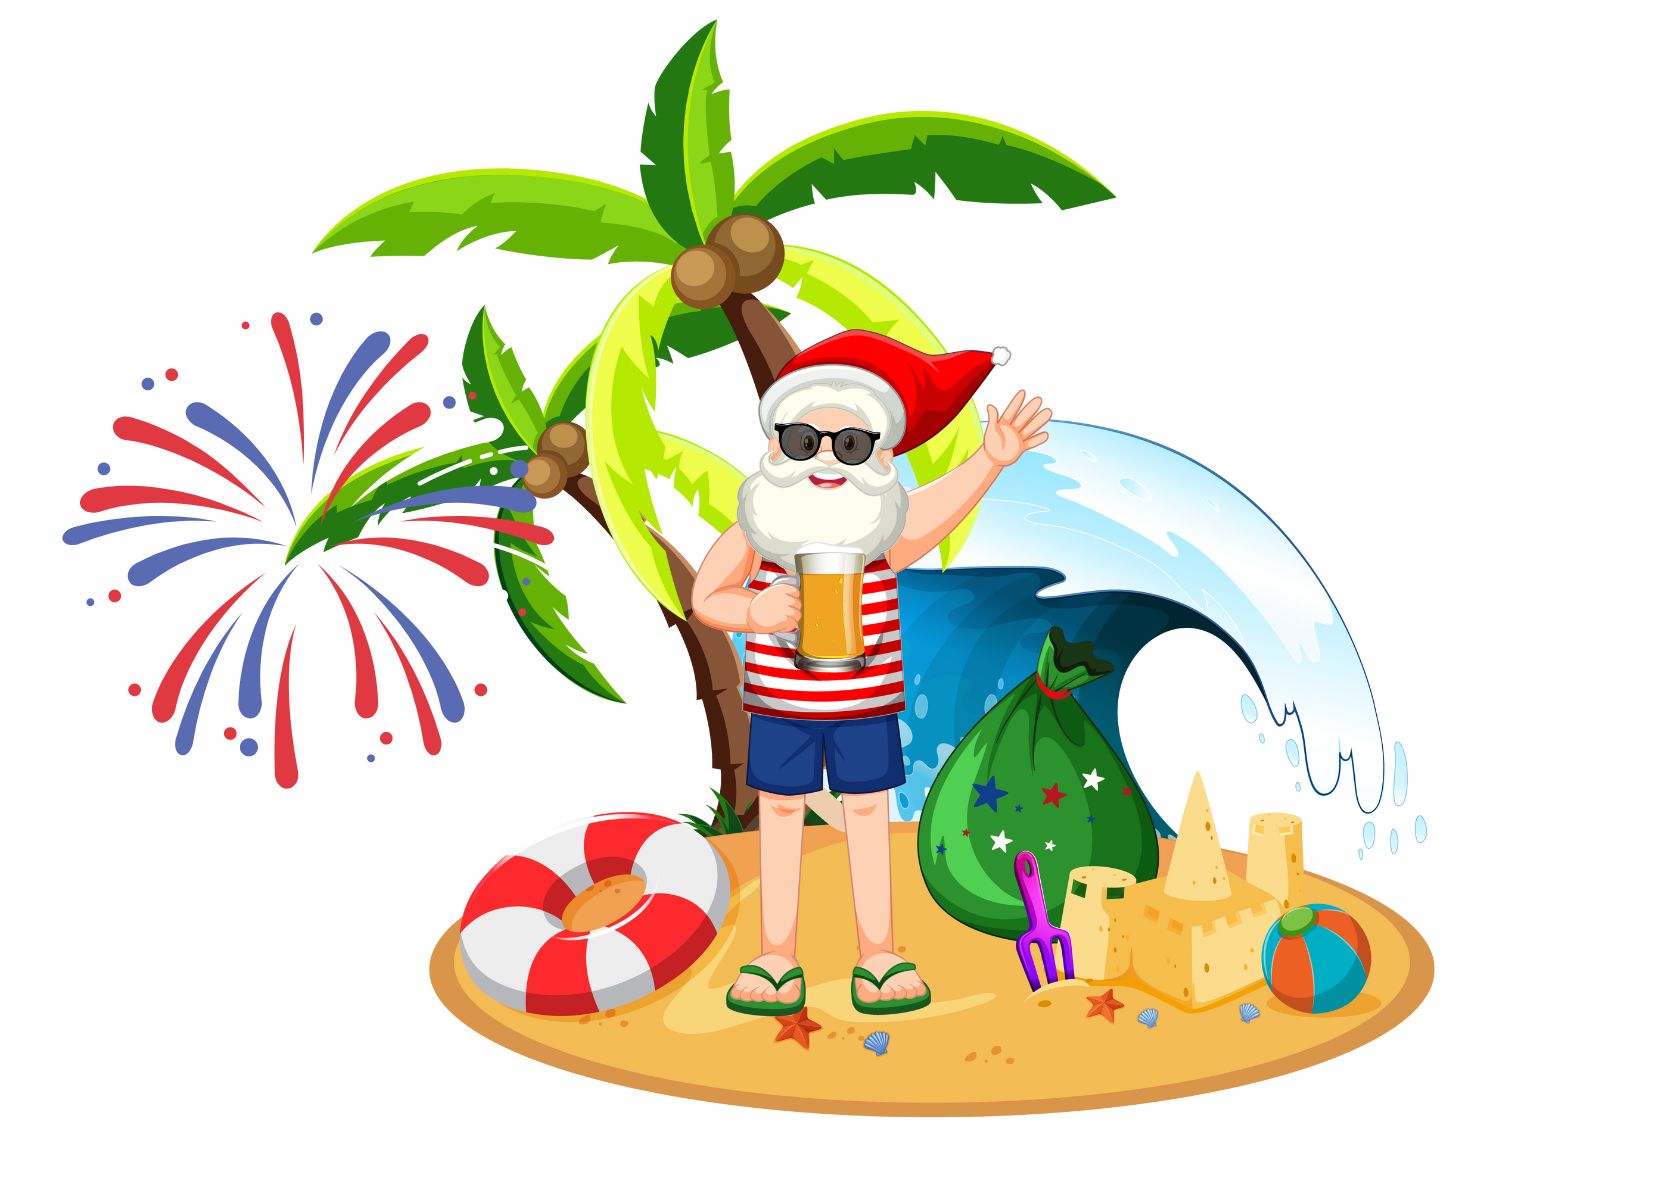 graphic of man dressed in shorts and tshirt with a santa hat on a desert island, wearing sunglasses